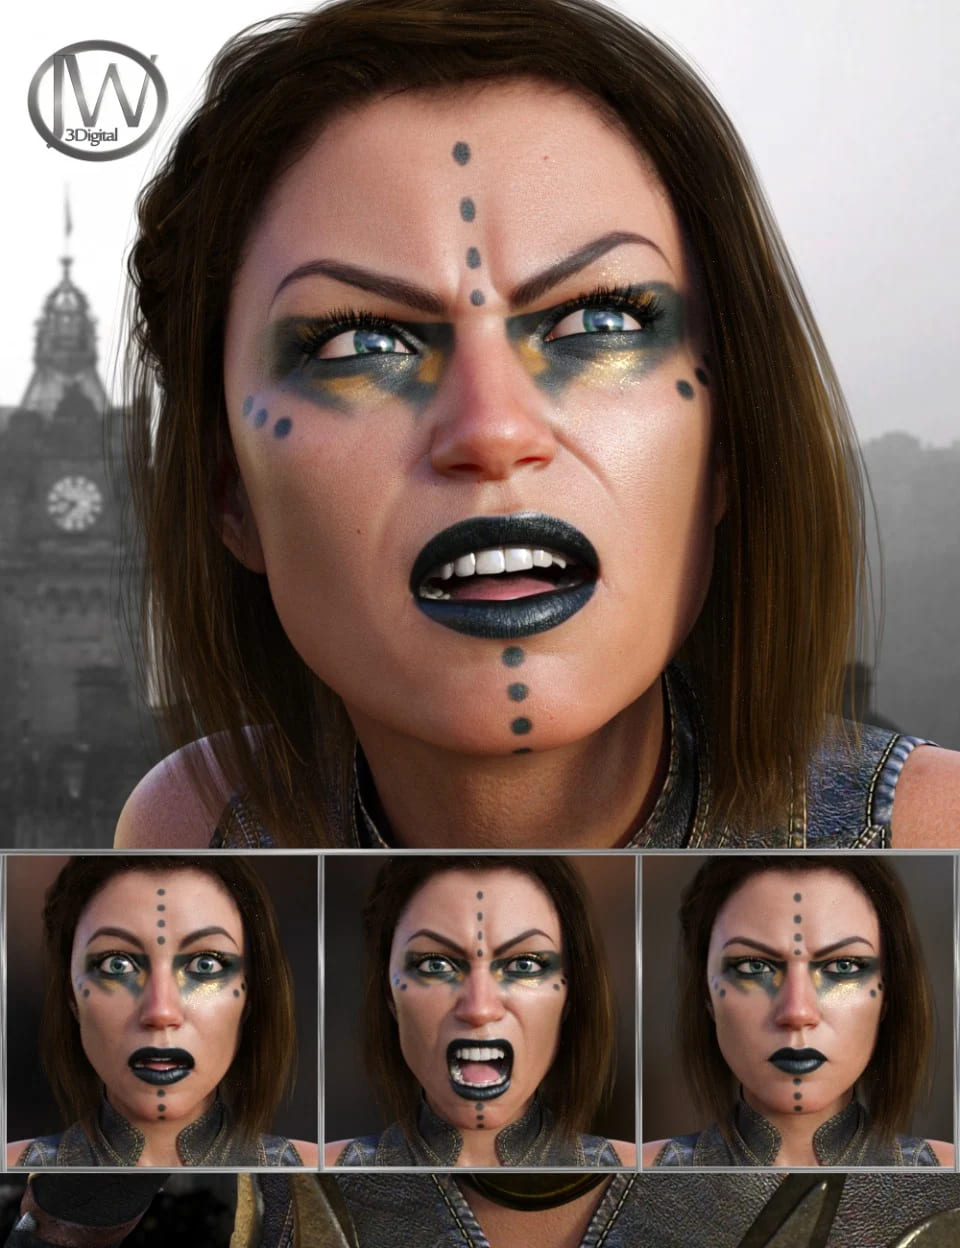 Discoverer - Expressions for Genesis 8 Female and Angharad 8_DAZ3D下载站